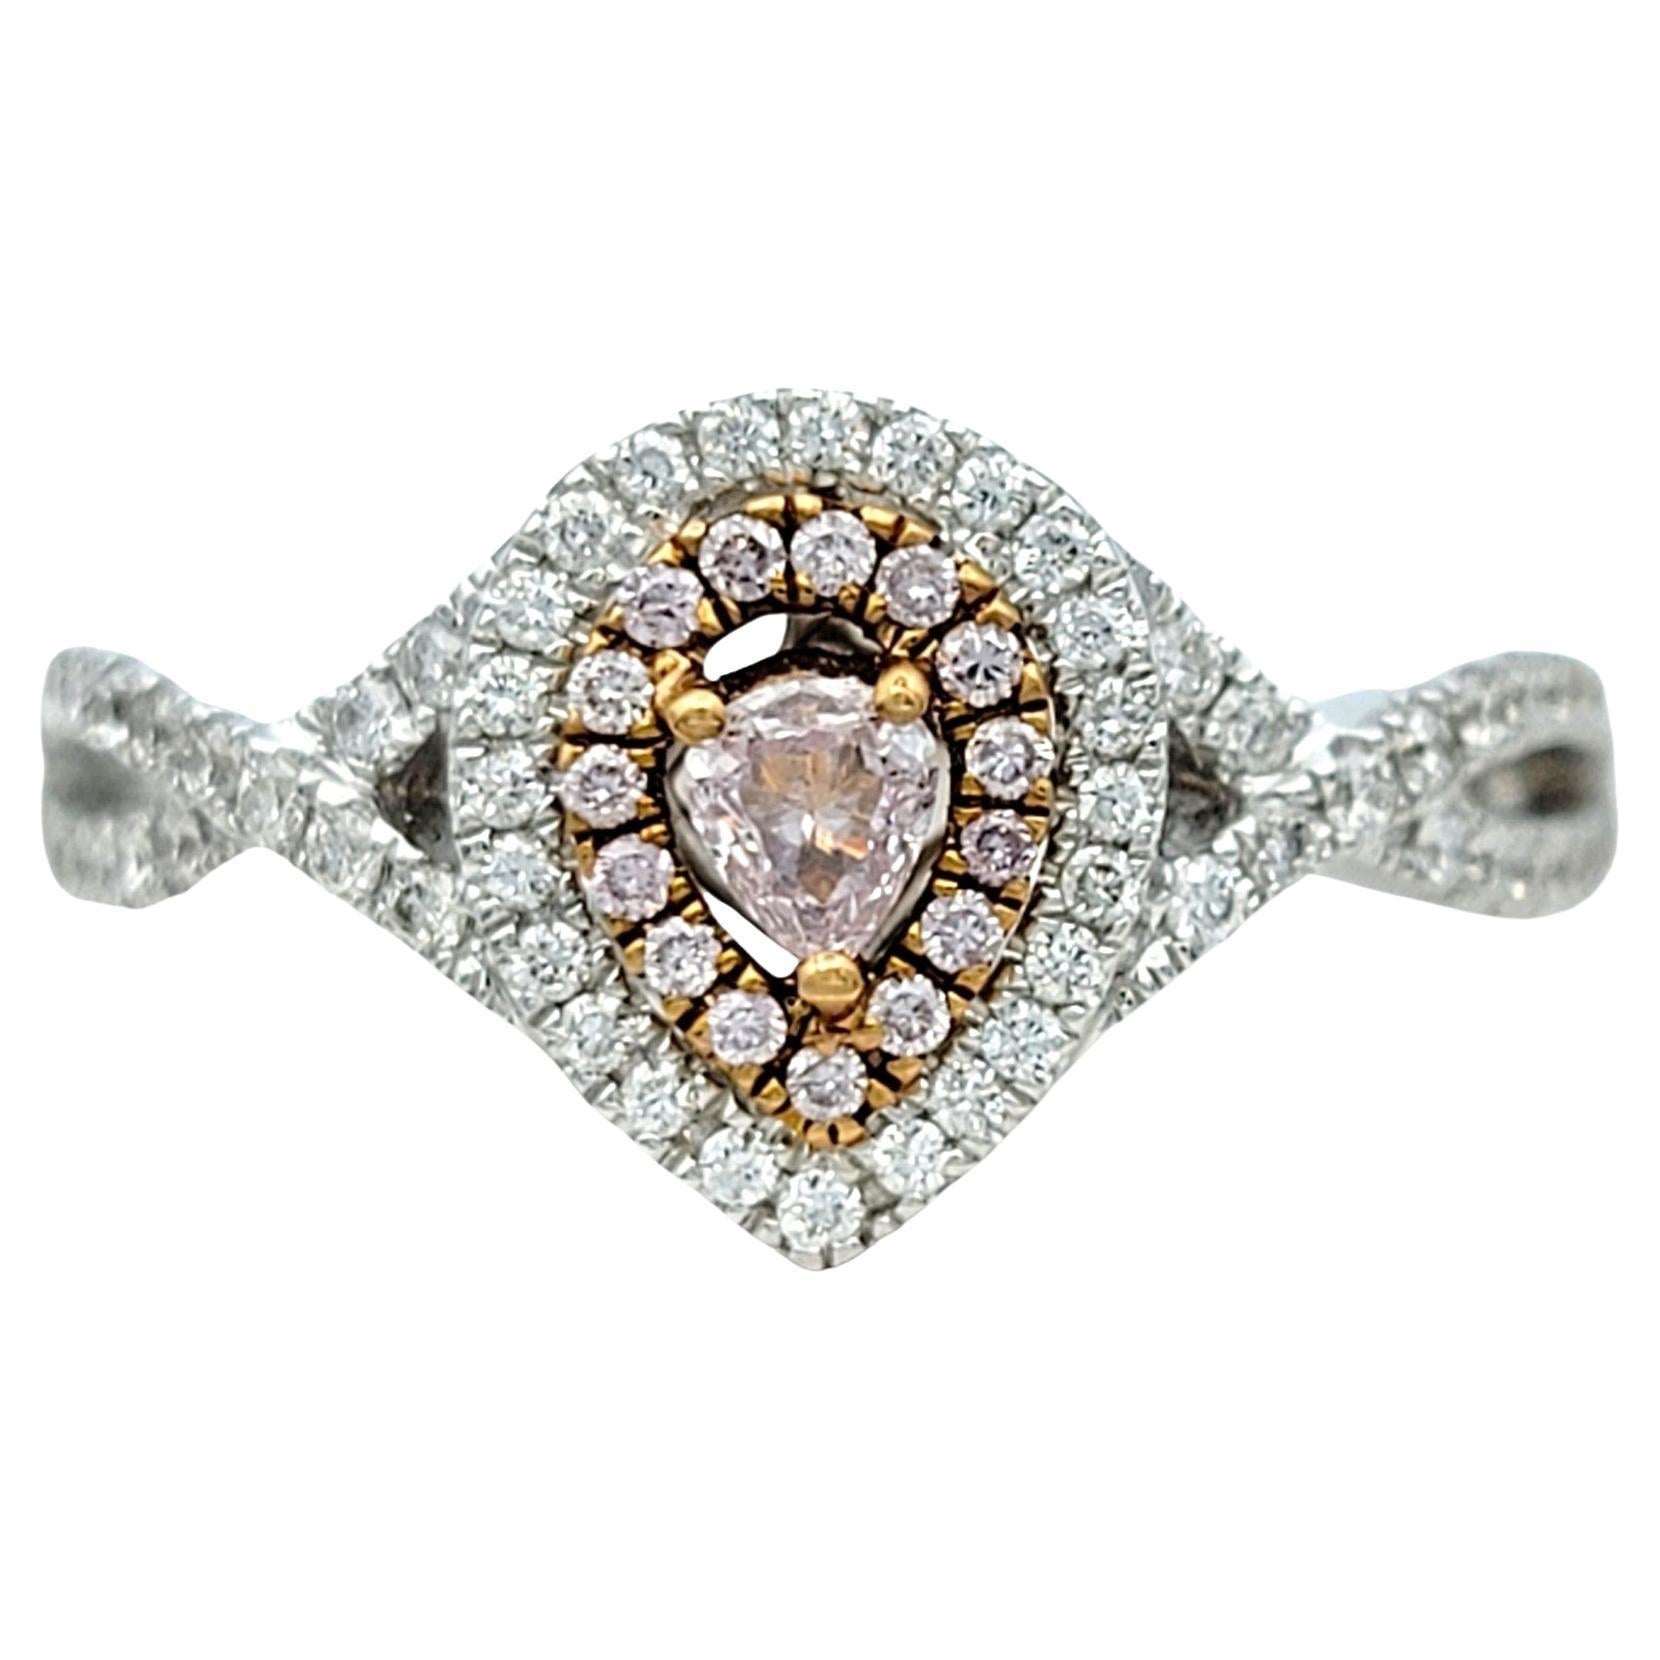 Contemporary Pink and White Pear-Shaped Diamond Double Halo Ring Set in 18 Karat White Gold For Sale